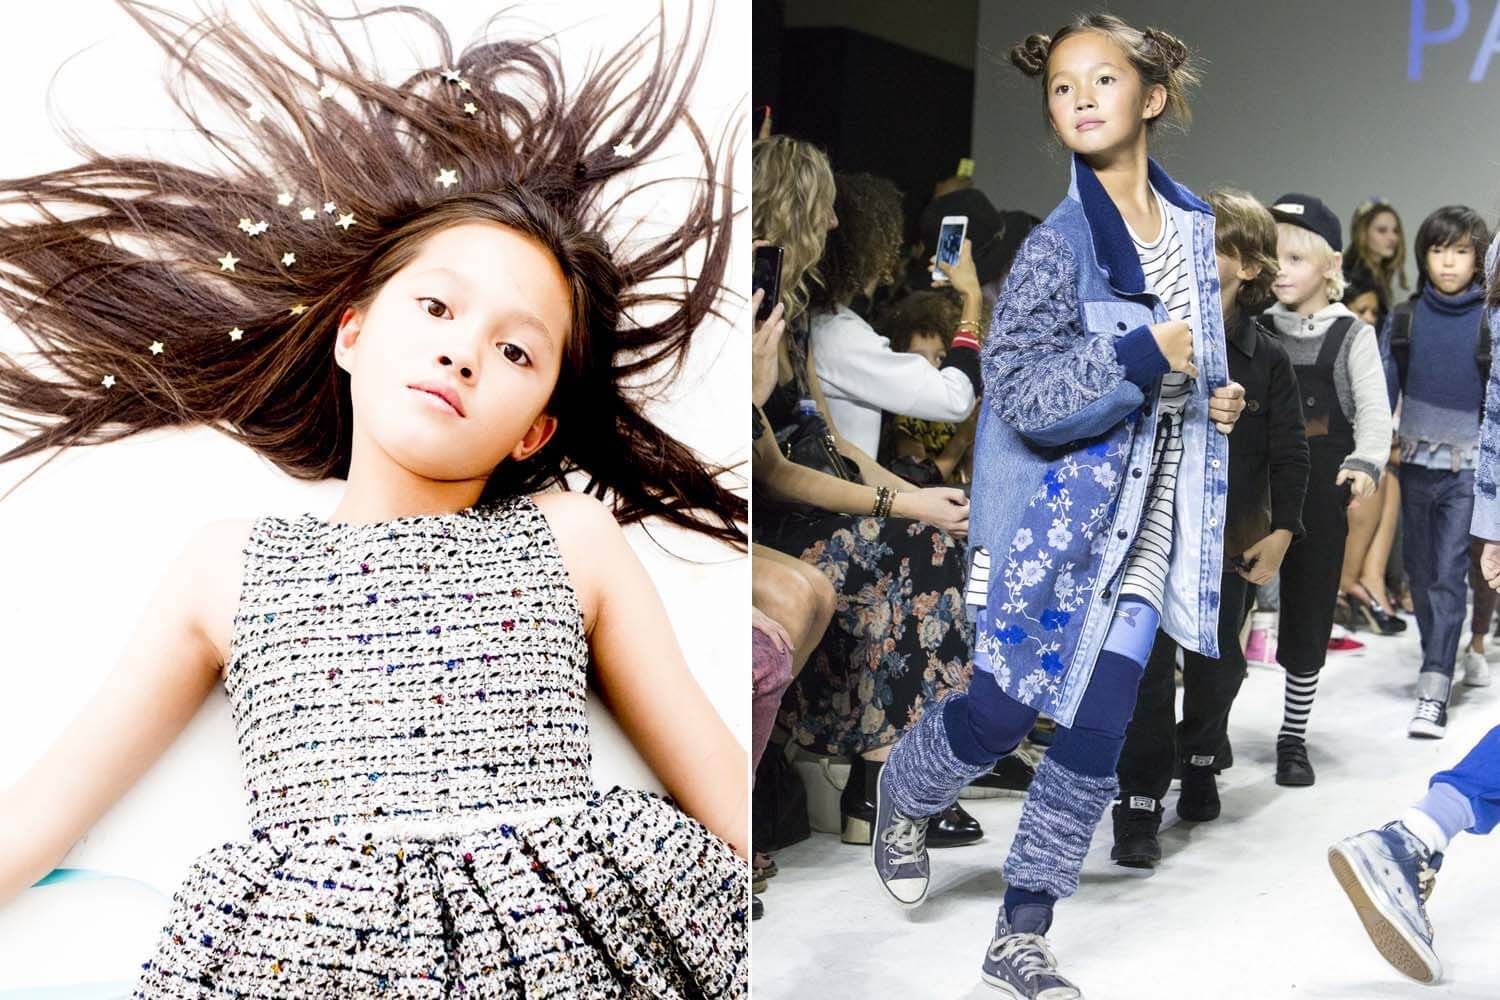 HOW TO PREPARE YOUR KID MODEL FOR THE MODELLING INDUSTRY